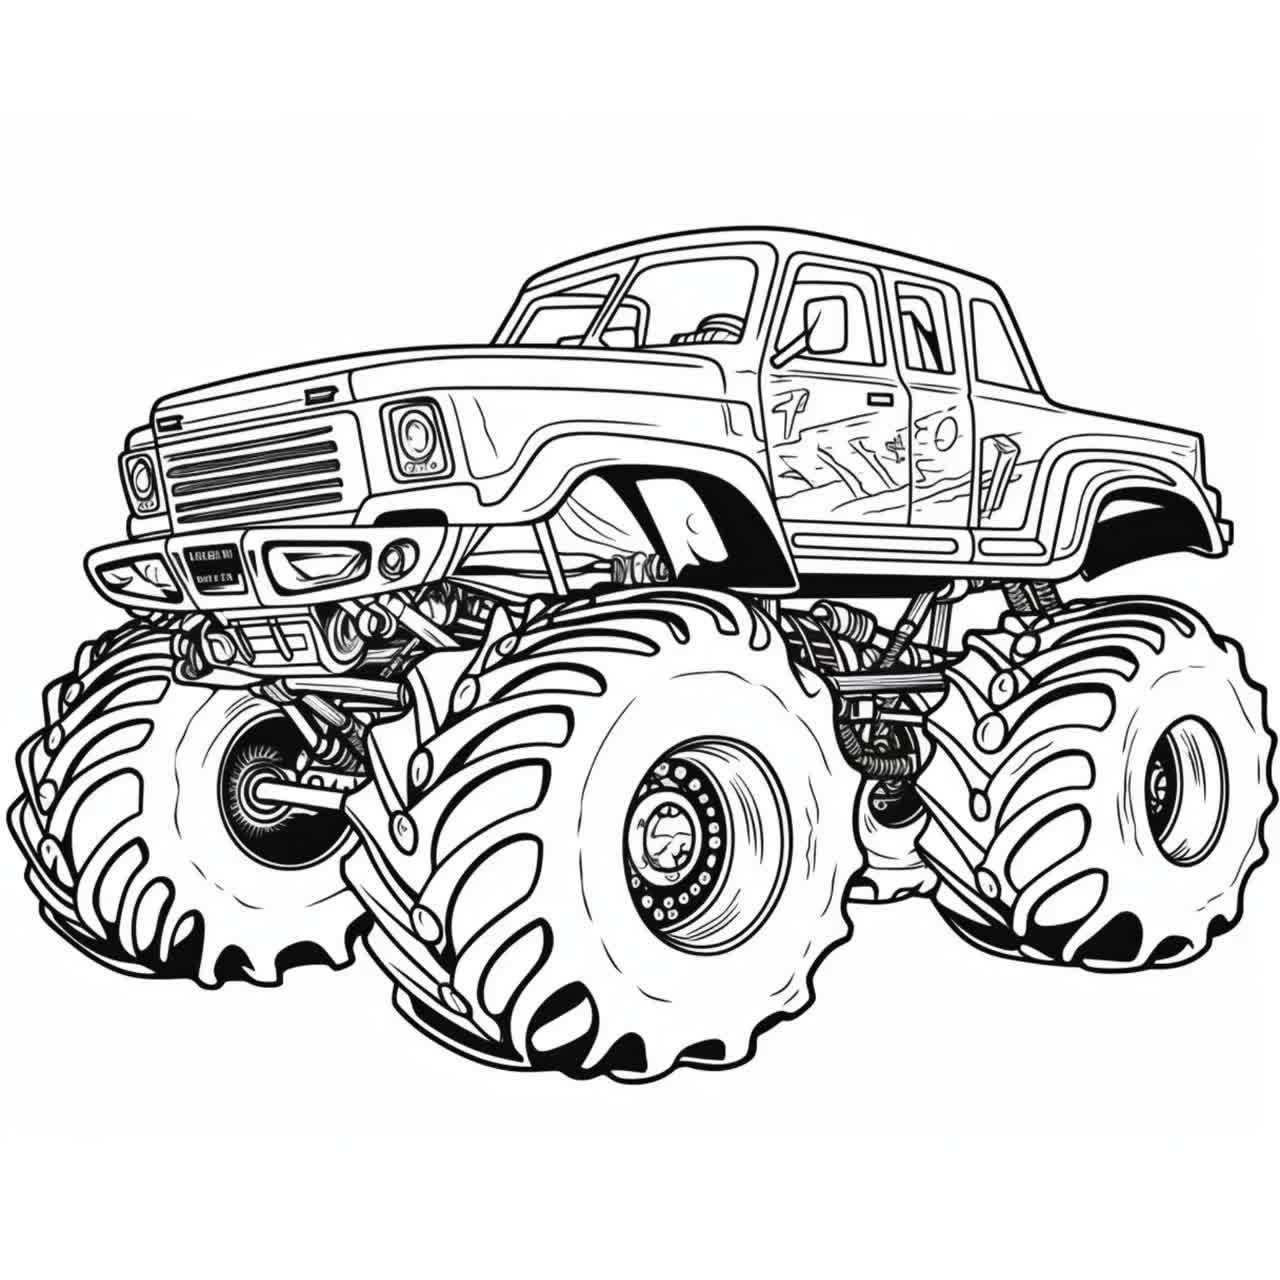 Monster Truck Coloring Book for Kids: Coloring Book for Kids Ages